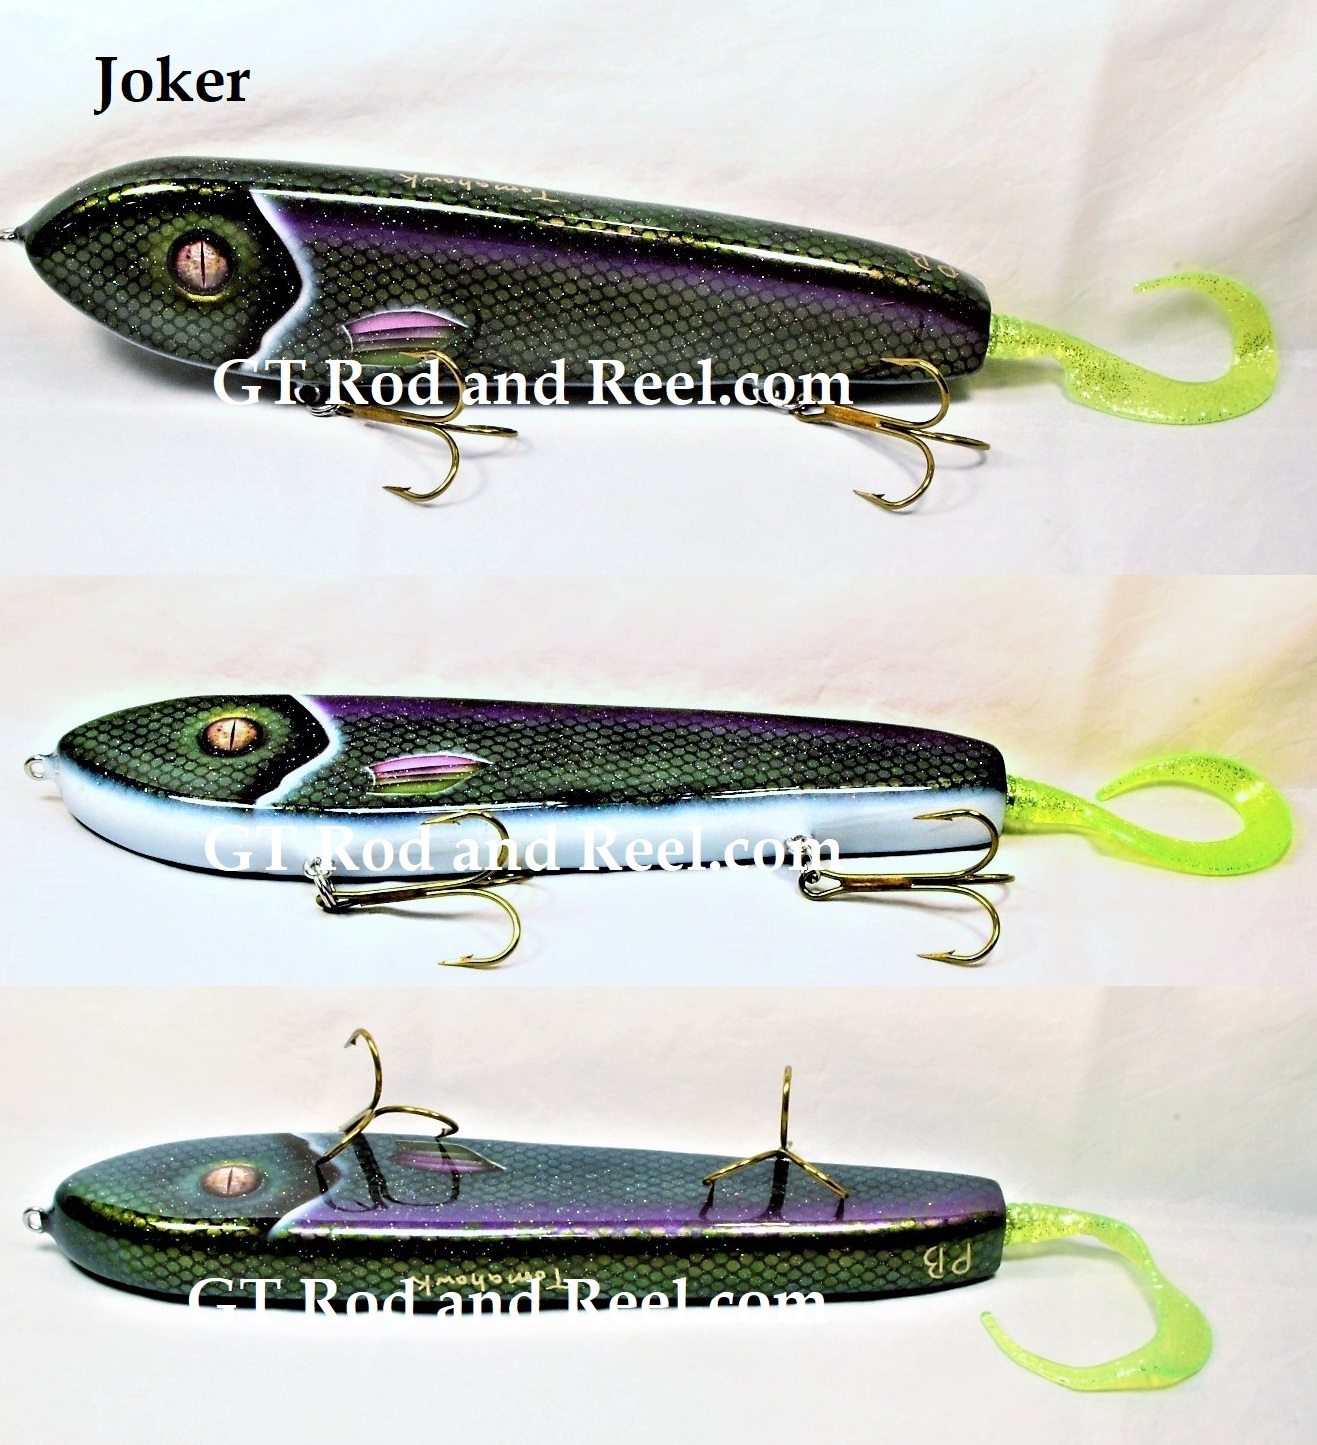 PB 11 Tomahawk Wide Glide Soft Tail; Joker Great Little Dive and Rise Bait,  Can Be Worked a Little Quicker Then Its Big Brother, Great Spring Bait, 2/0  HooksGreat Pant Jobs 